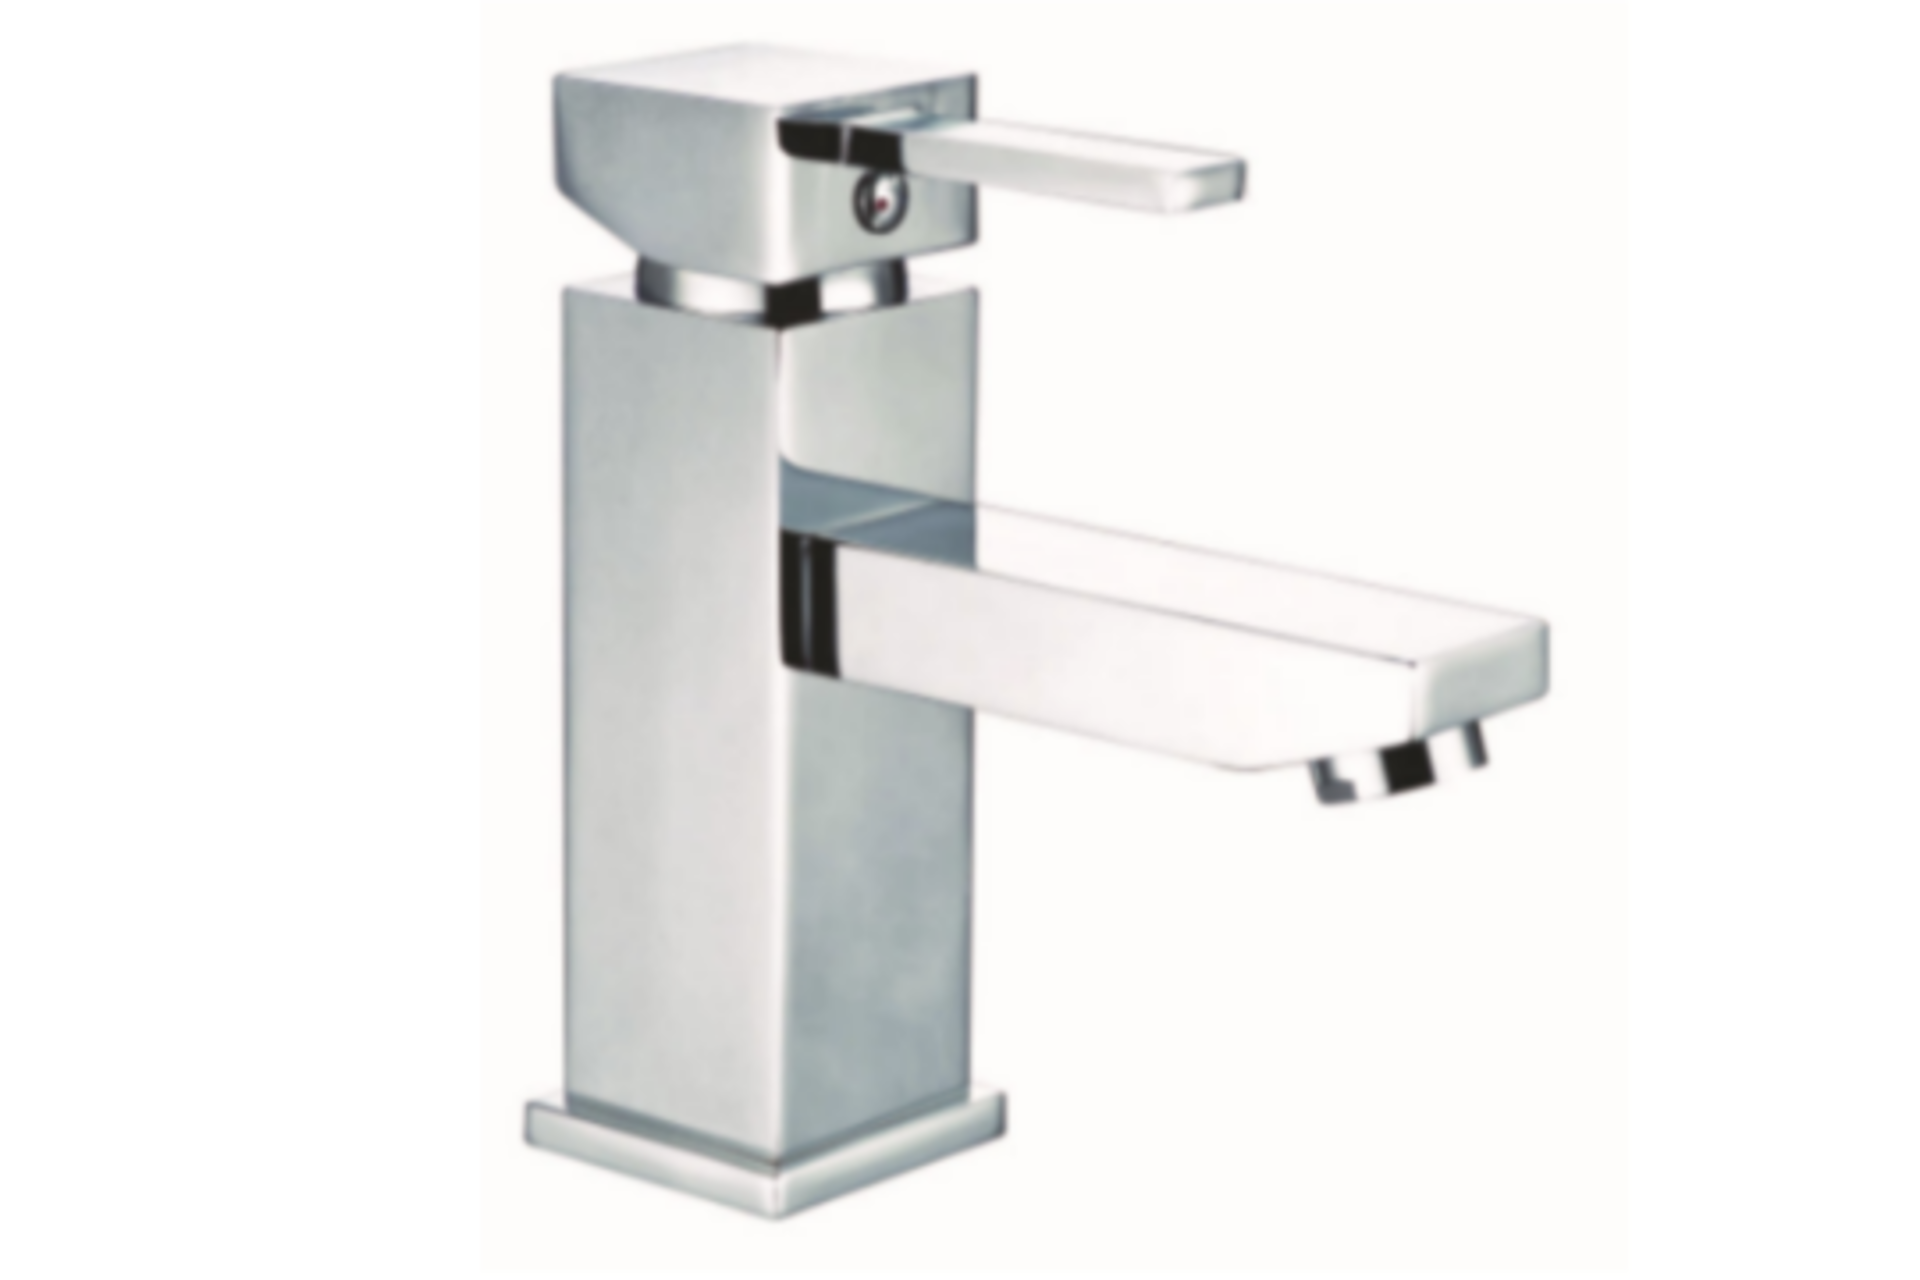 6 x NEW BOXED Abode Lamona CONTEMPORARY CHROME BATHROOM BASIN TAPS. RRP £79.99 EACH, GIVING THIS LOT